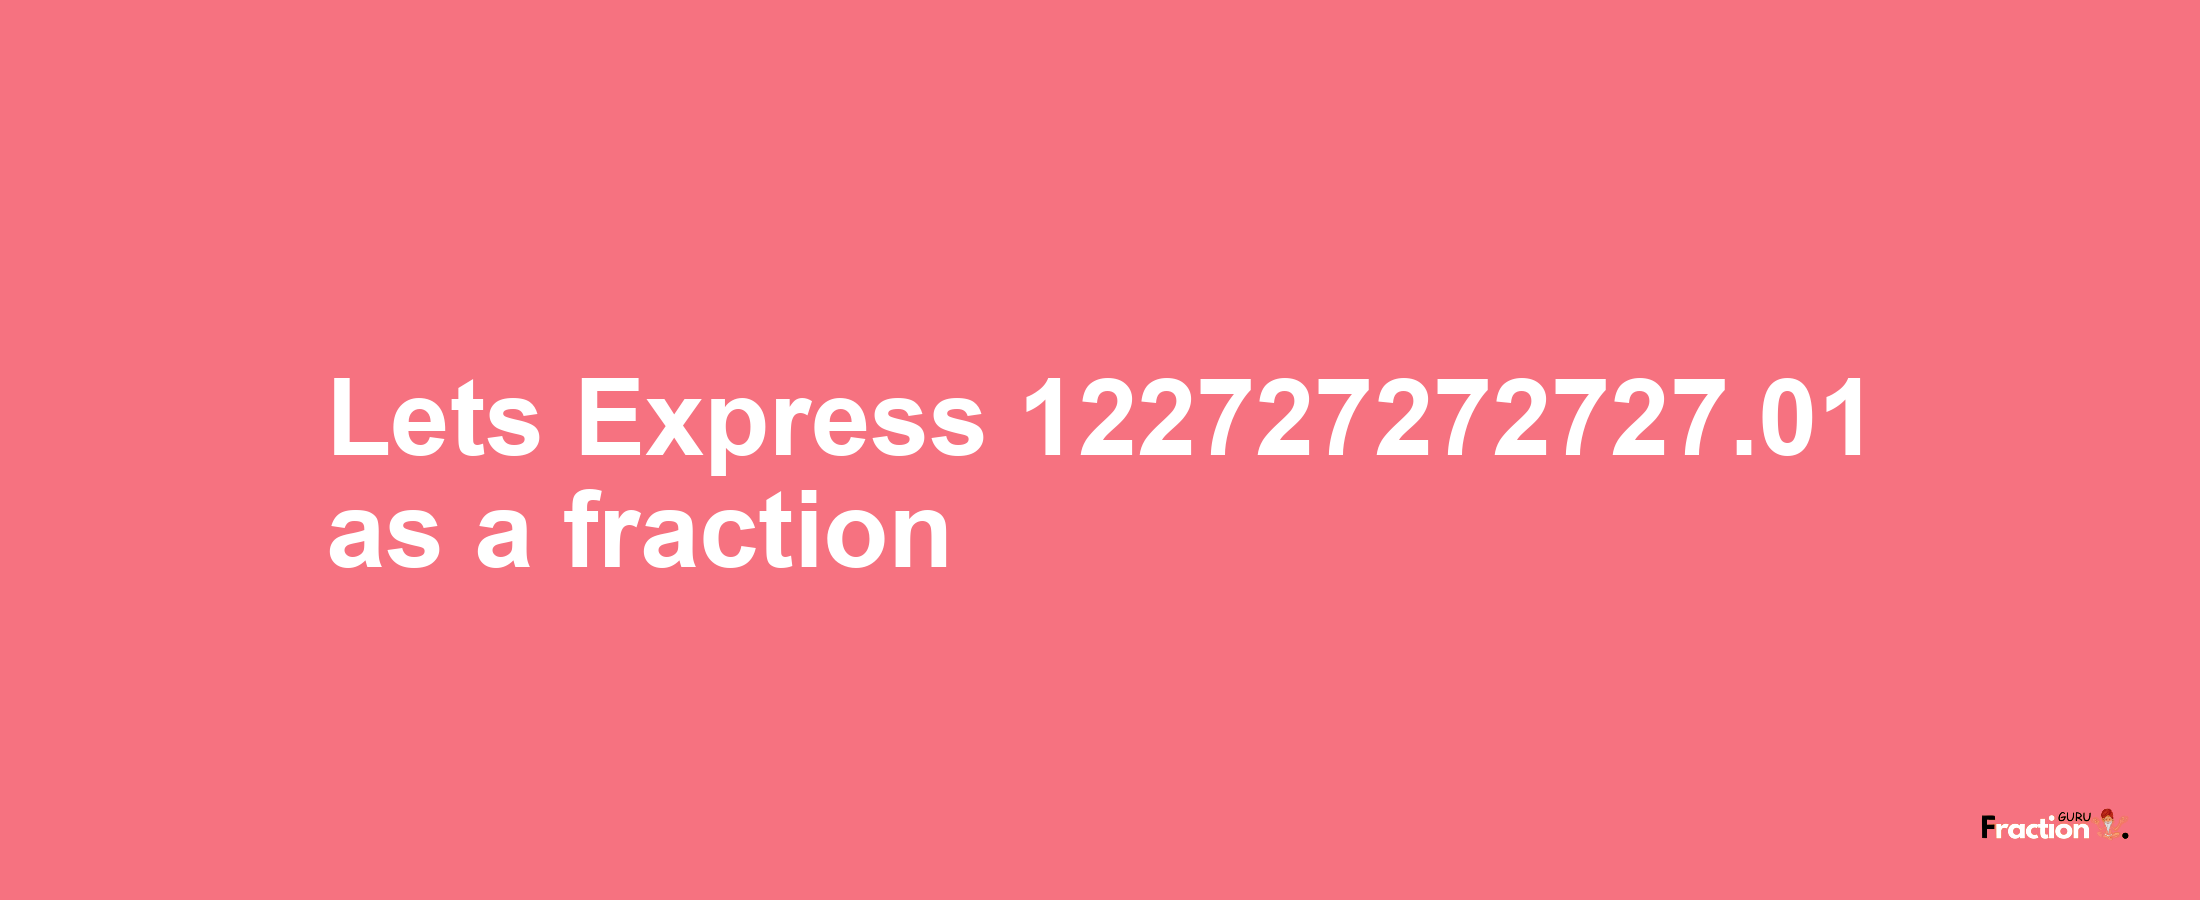 Lets Express 122727272727.01 as afraction